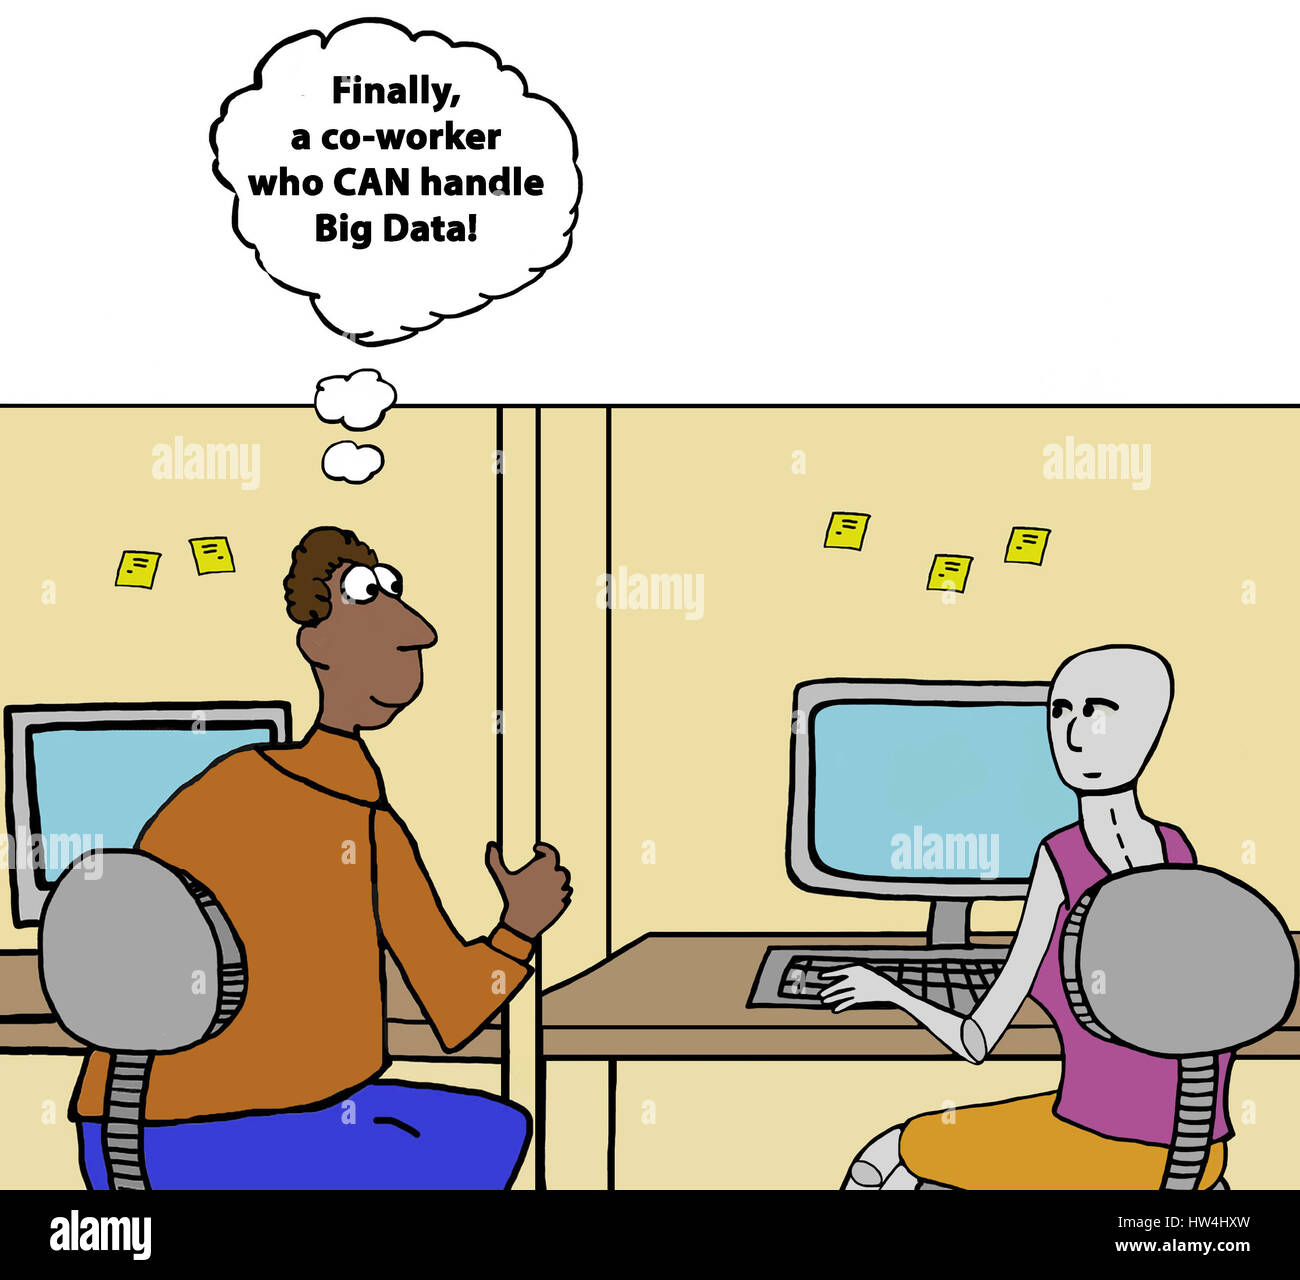 Business cartoon about a robot that CAN handle big data. Stock Photo